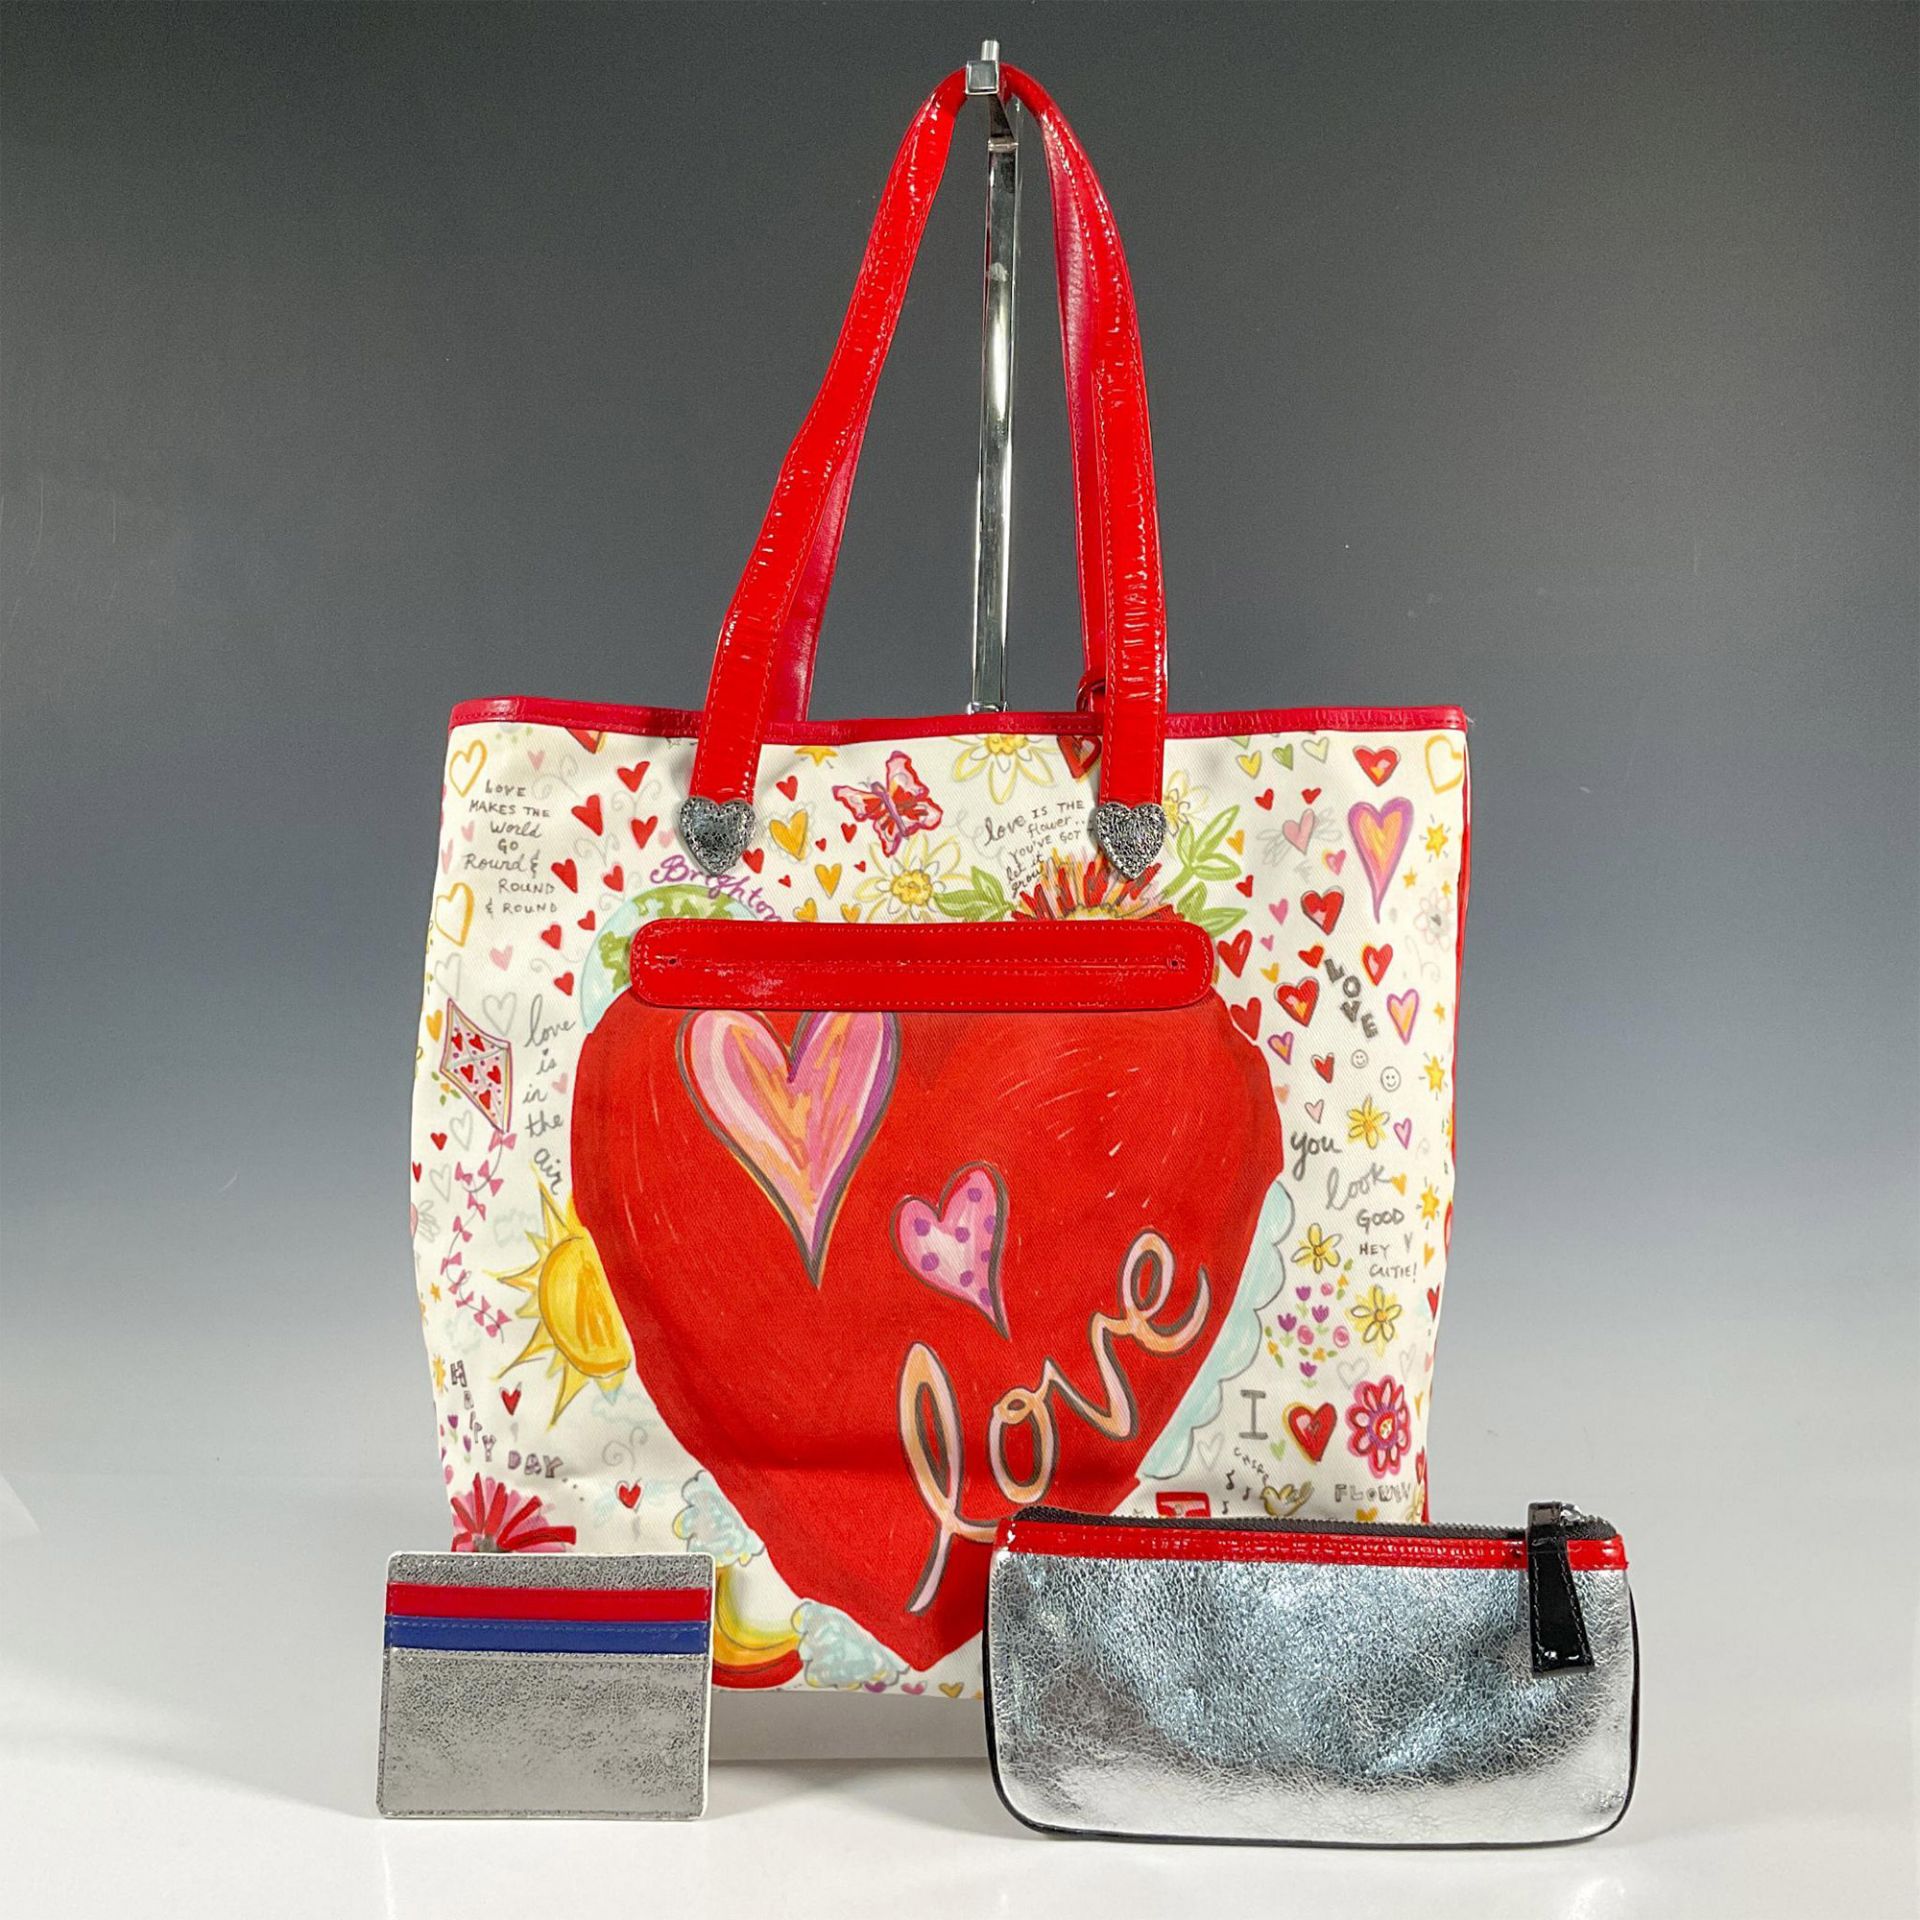 3pc Brighton Handbag, Wallet and Pouch, Love and Makeup - Image 2 of 4